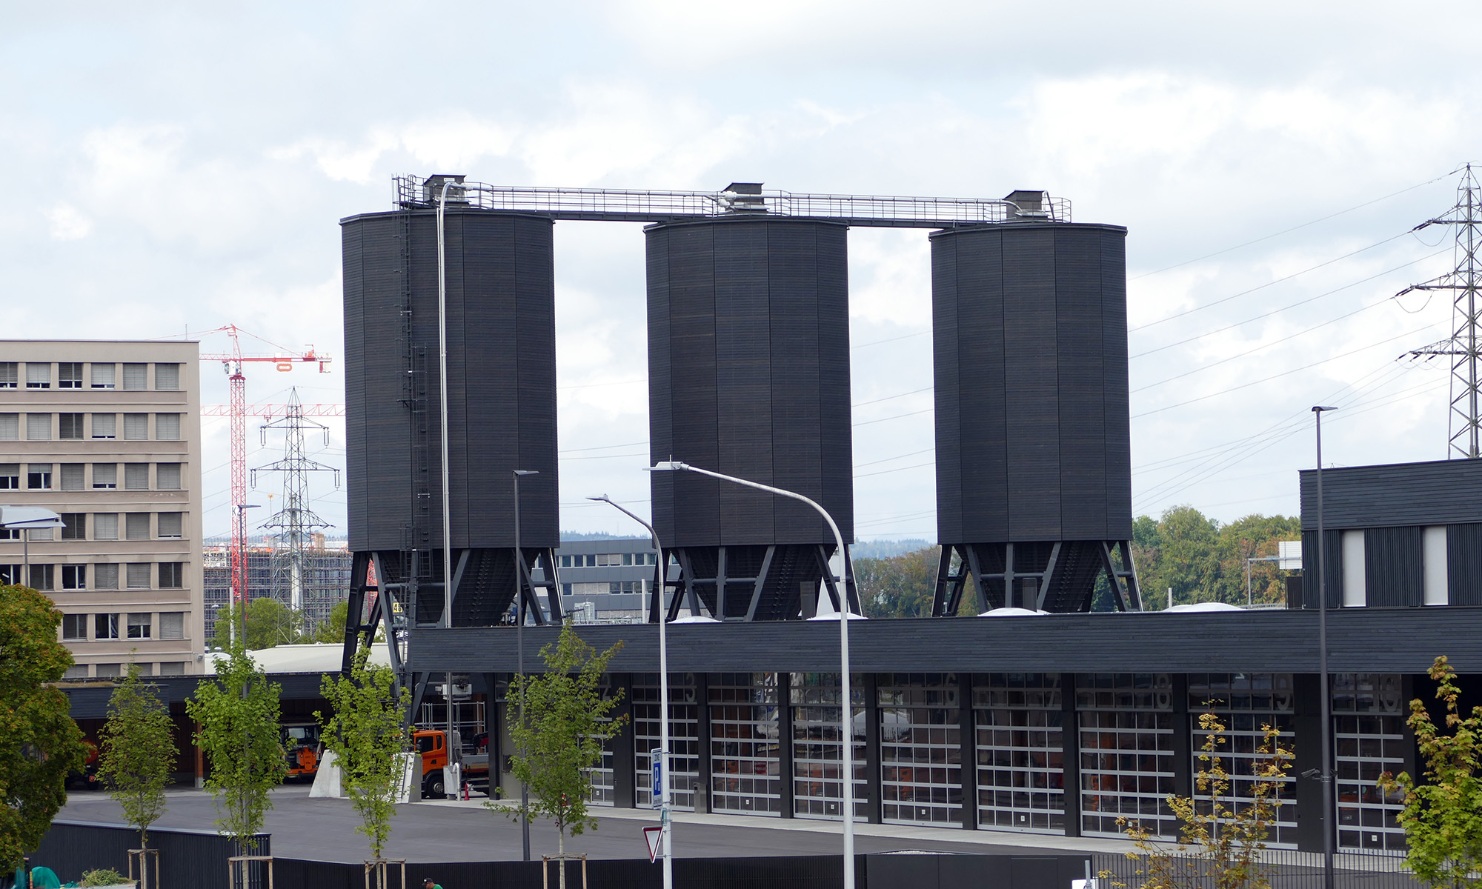 Three twelve-sided timber silos (E12), connected by a steel substructure and wooden roof platform, behind a fleet of trucks